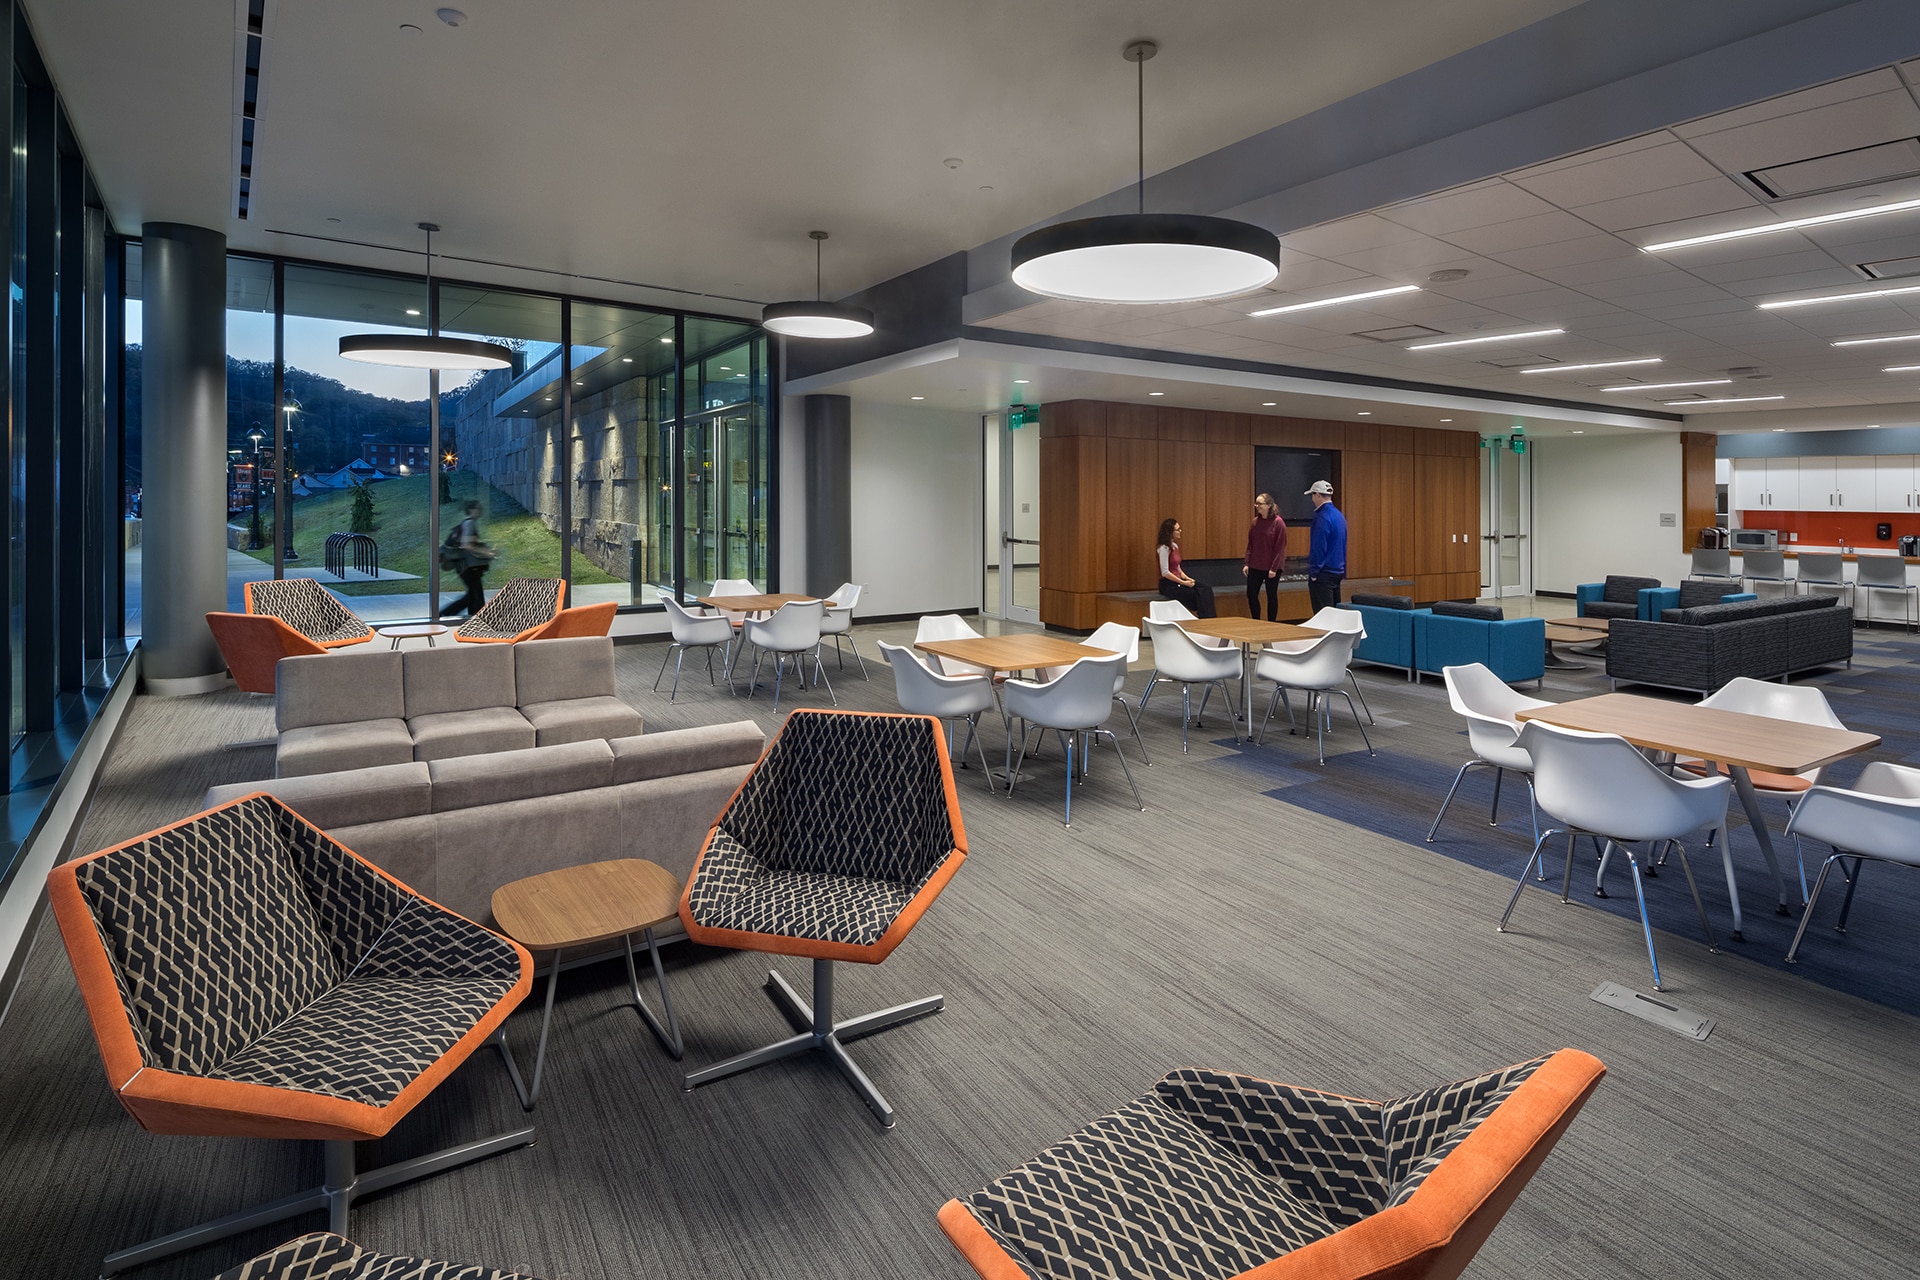 interior lounge of university of pikeville health education building designed by trivers architectural firm in st. louis